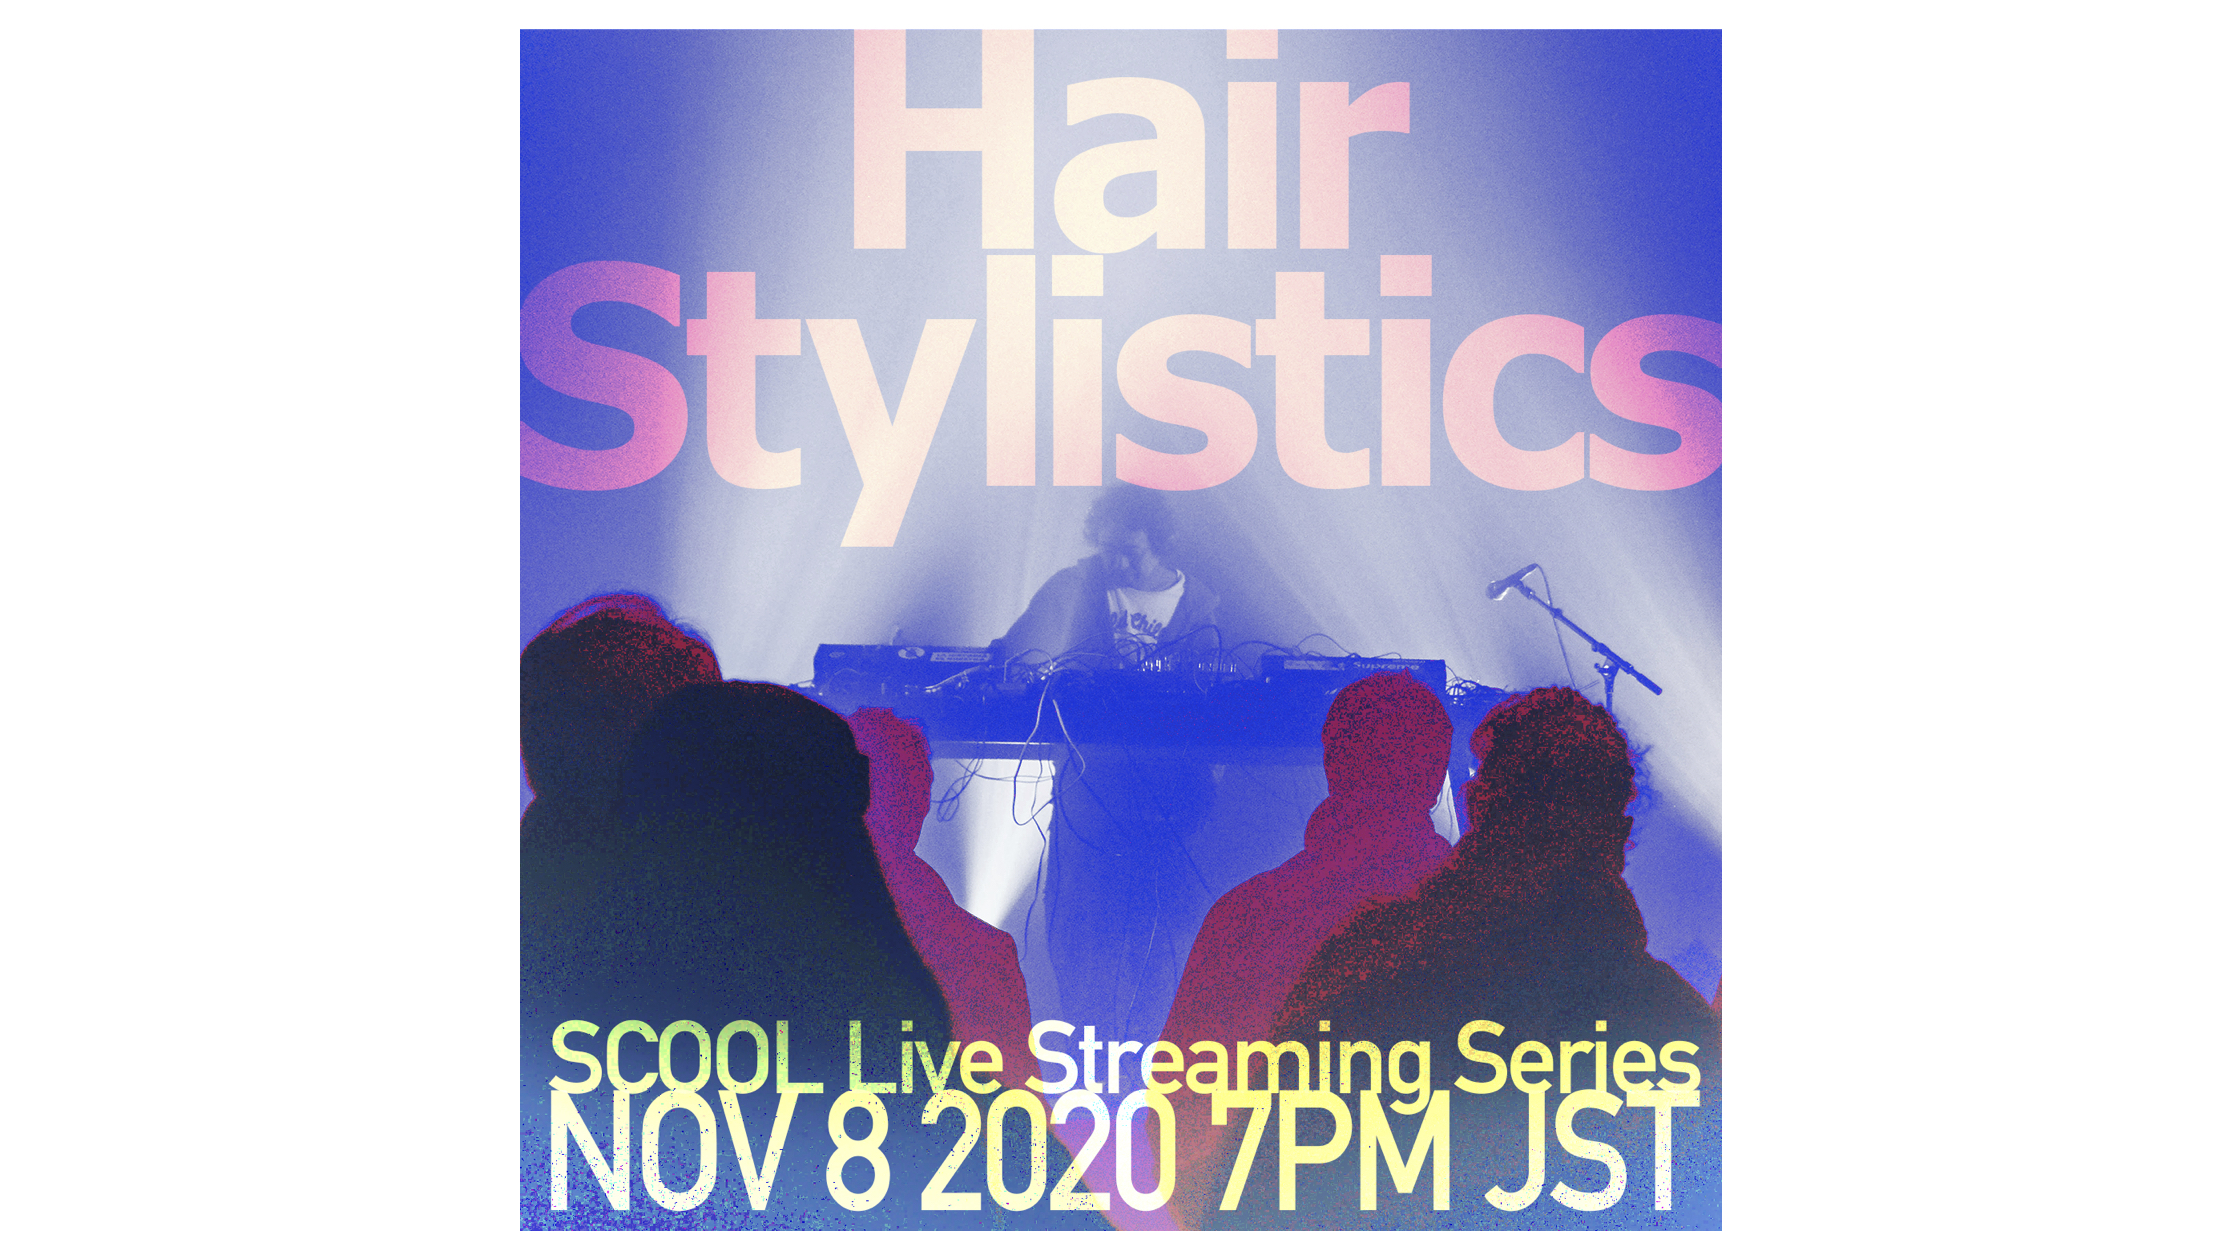 SCOOL Live Streaming Series<br>Hair Stylistics